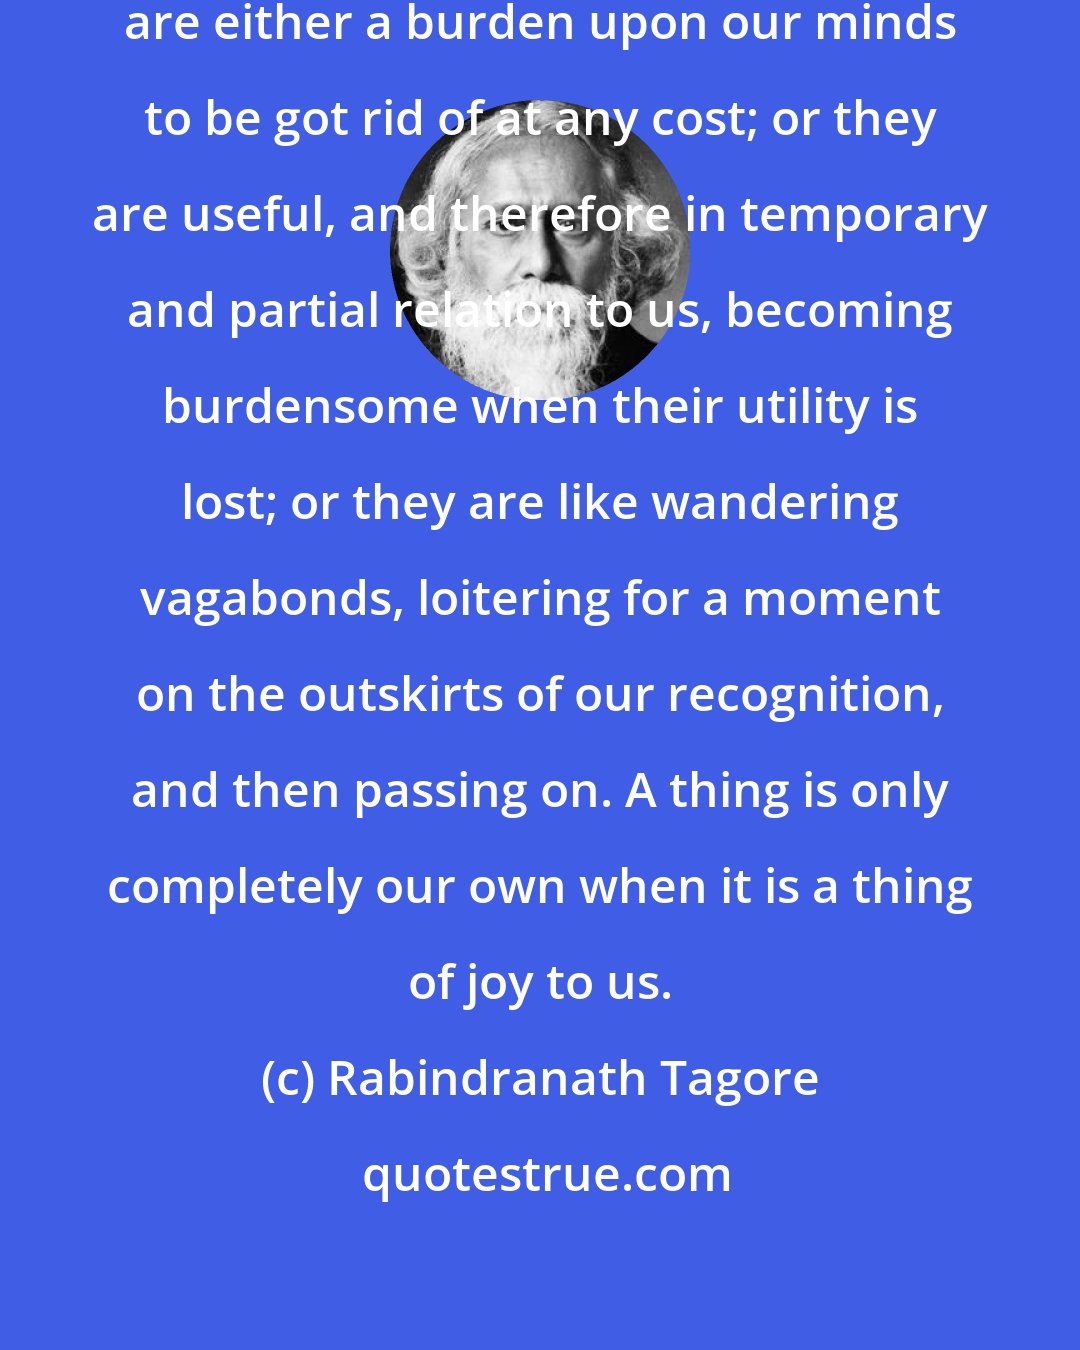 Rabindranath Tagore: Things in which we do not take joy are either a burden upon our minds to be got rid of at any cost; or they are useful, and therefore in temporary and partial relation to us, becoming burdensome when their utility is lost; or they are like wandering vagabonds, loitering for a moment on the outskirts of our recognition, and then passing on. A thing is only completely our own when it is a thing of joy to us.